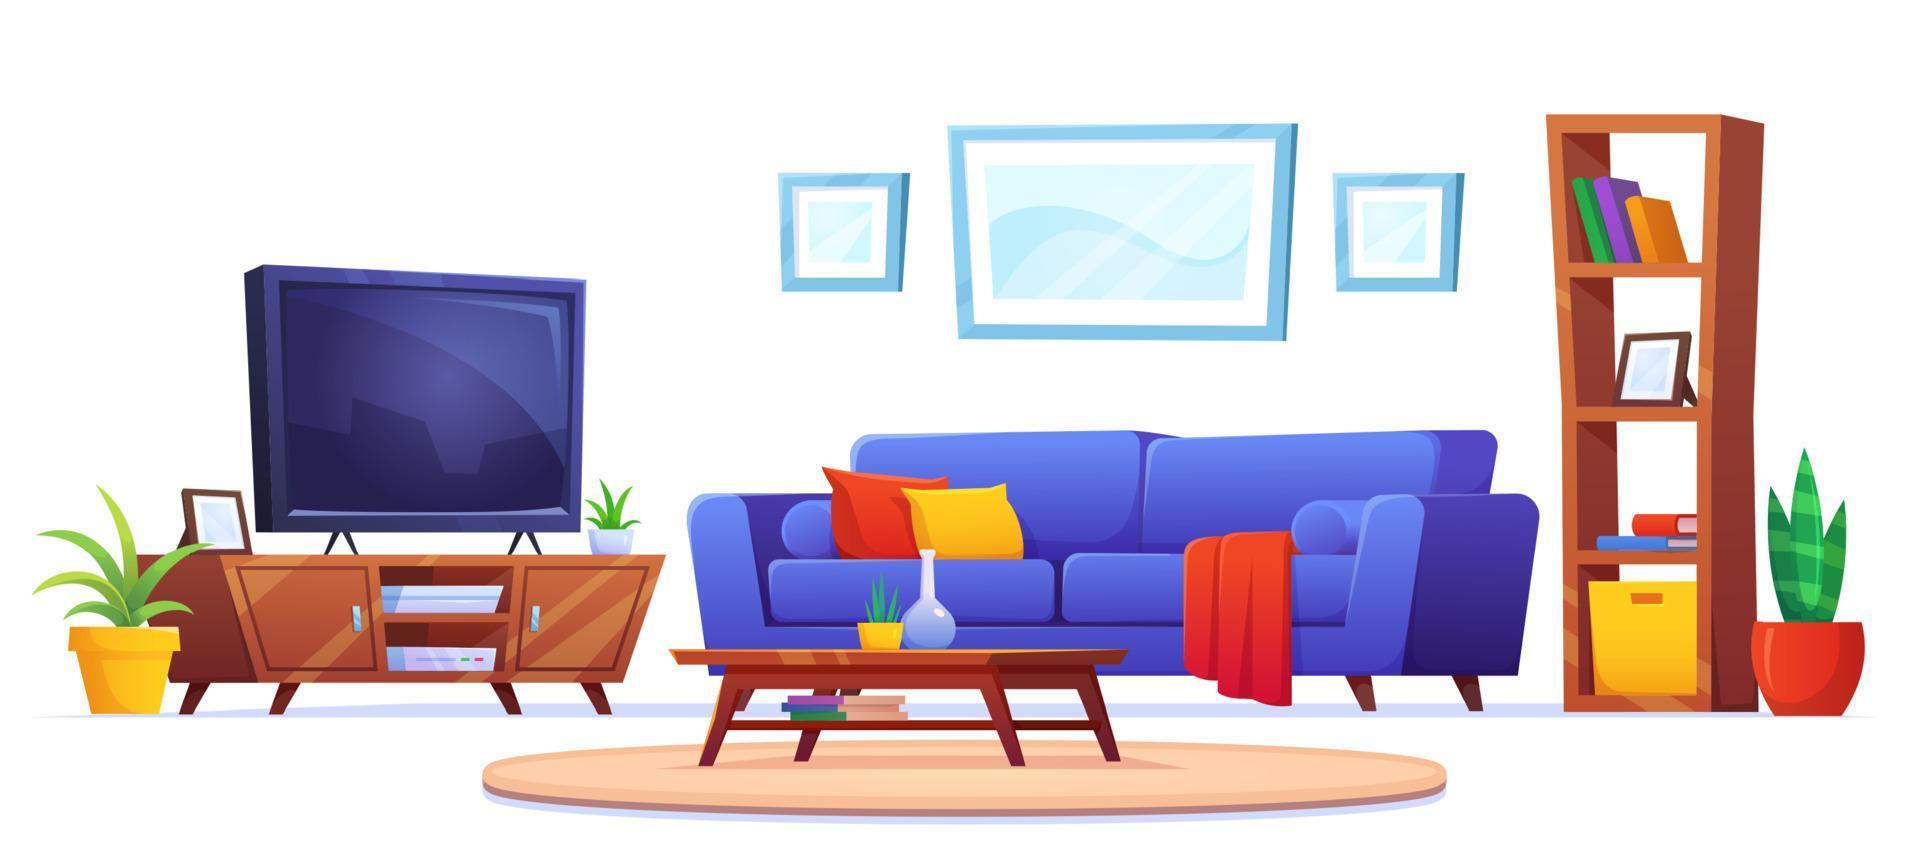 Living room interior with furniture and tv vector